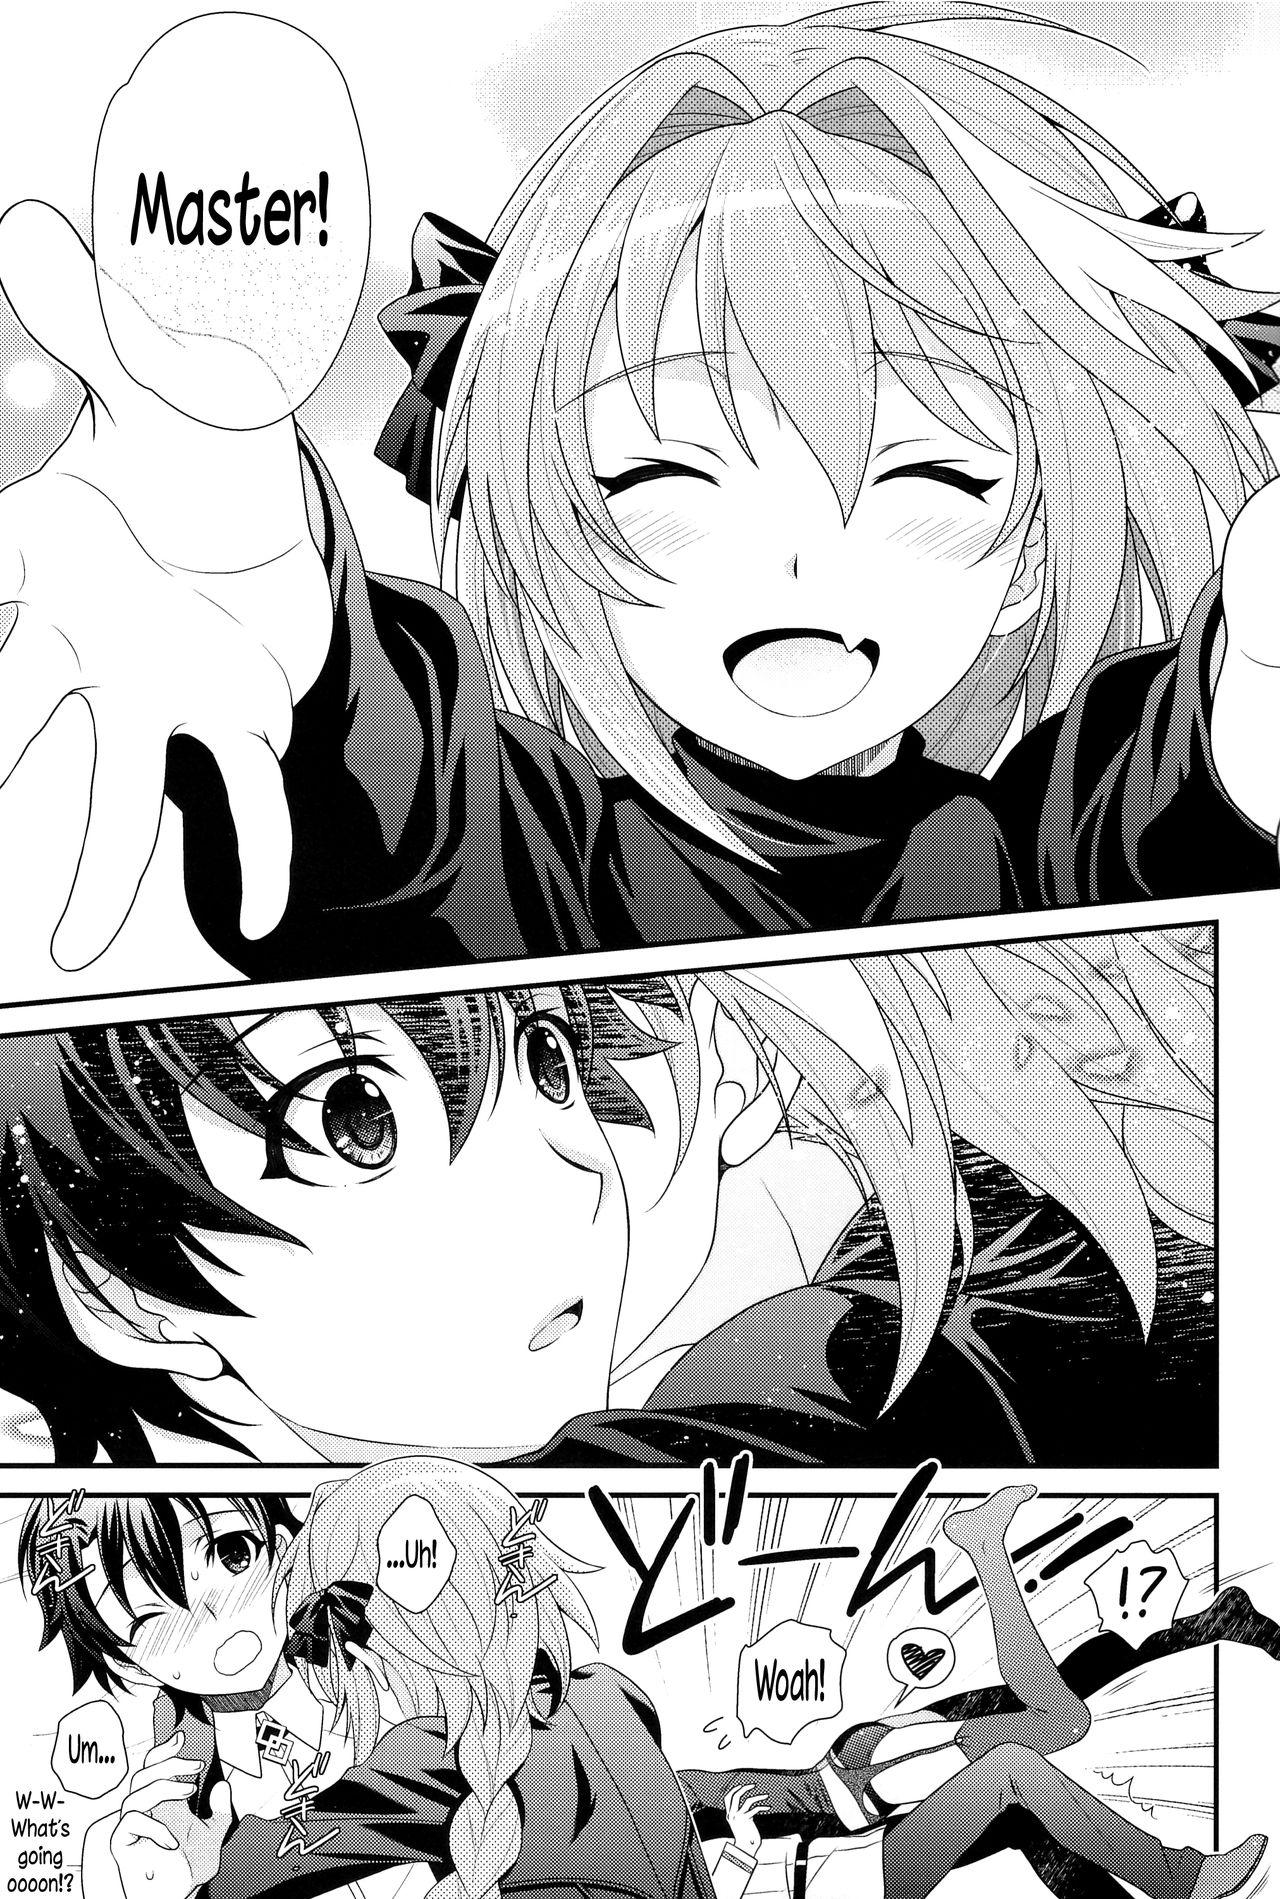 Titty Fuck Kyou kara Boku wa Master no Koibito | I’m Master’s Lover Starting from Today - Fate grand order Speculum - Page 4